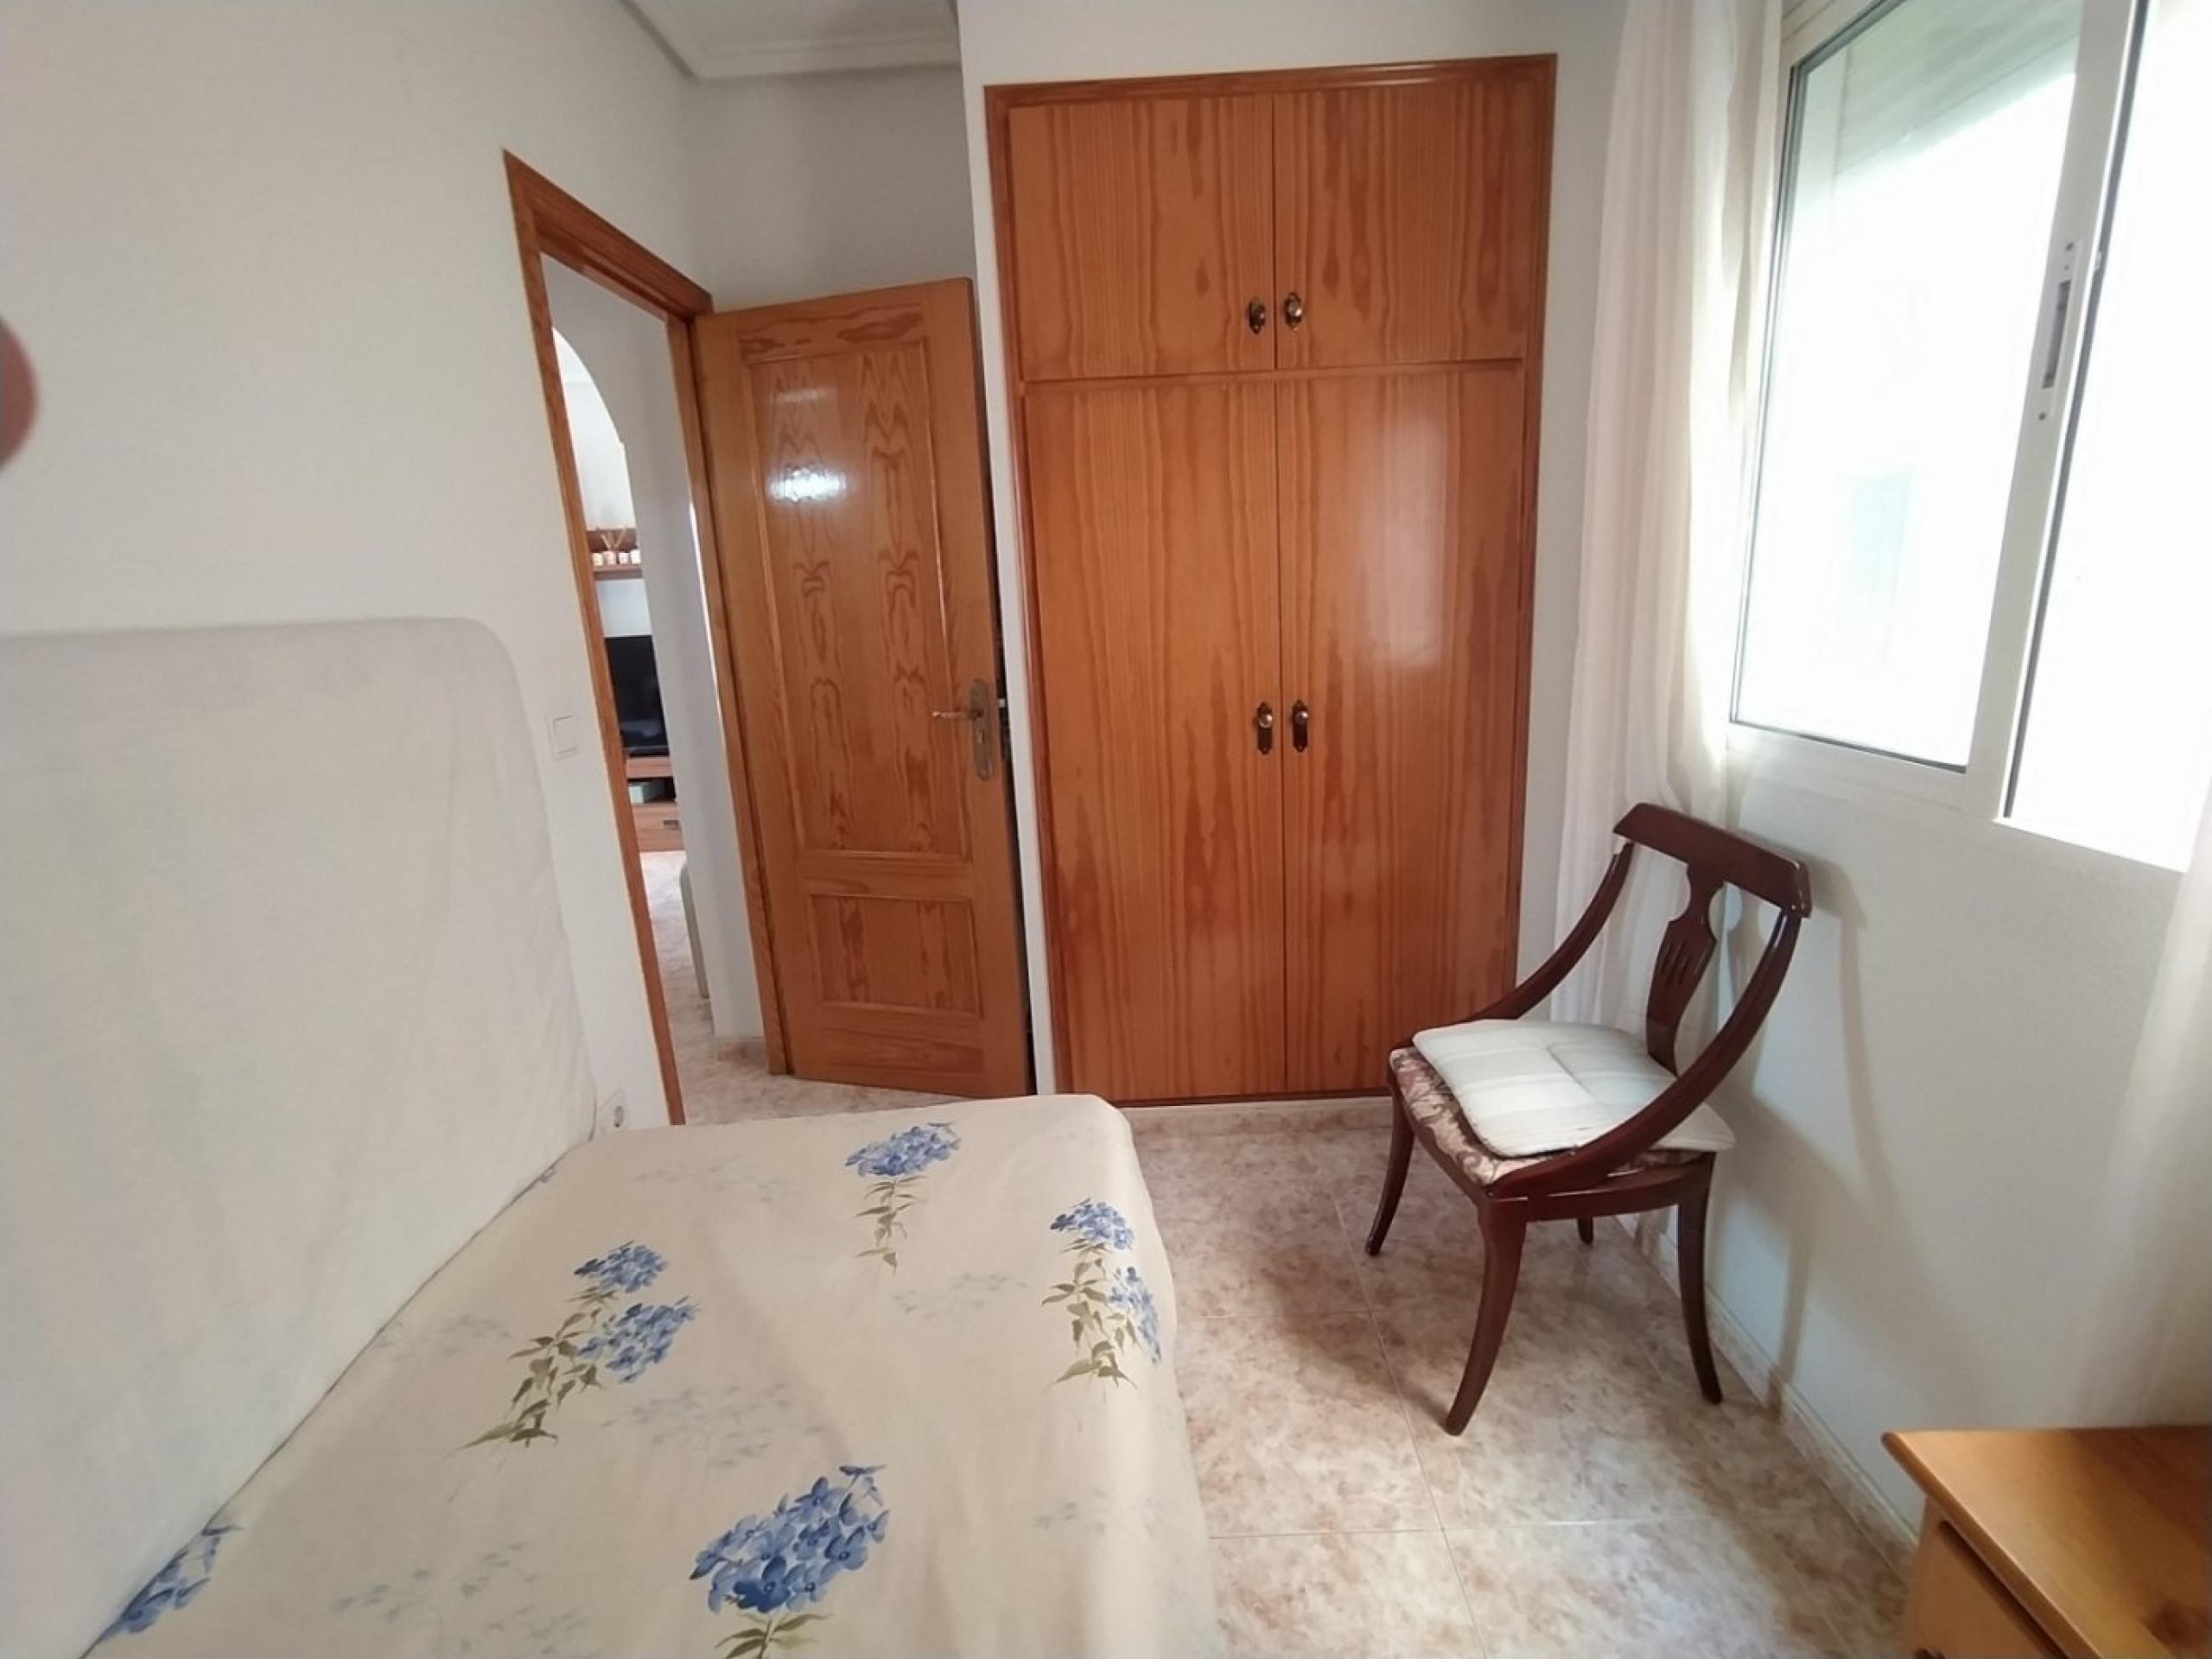 Appartement 3 chambres occasion